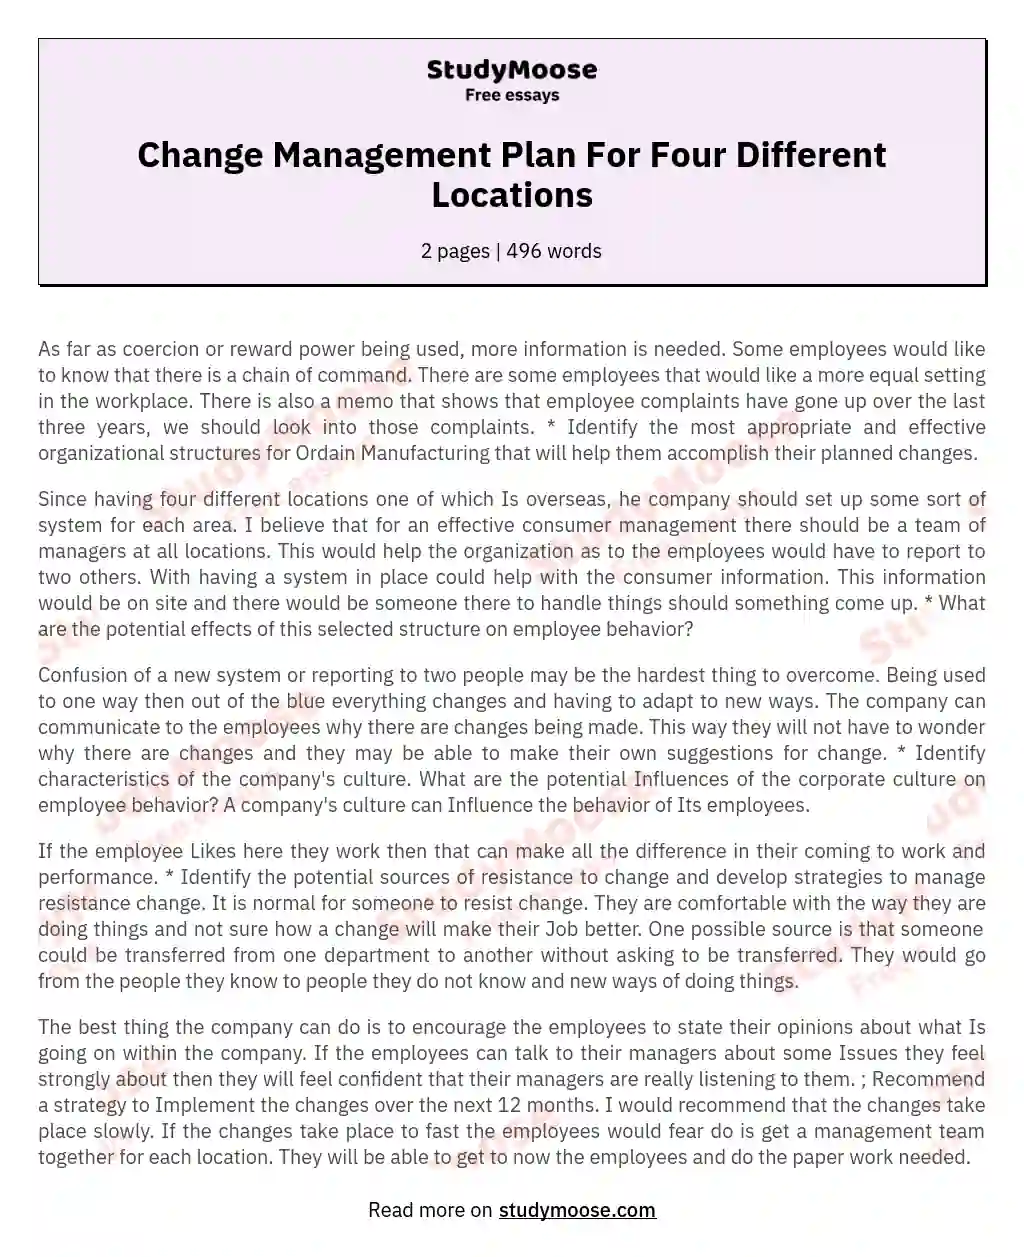 Change Management Plan For Four Different Locations essay